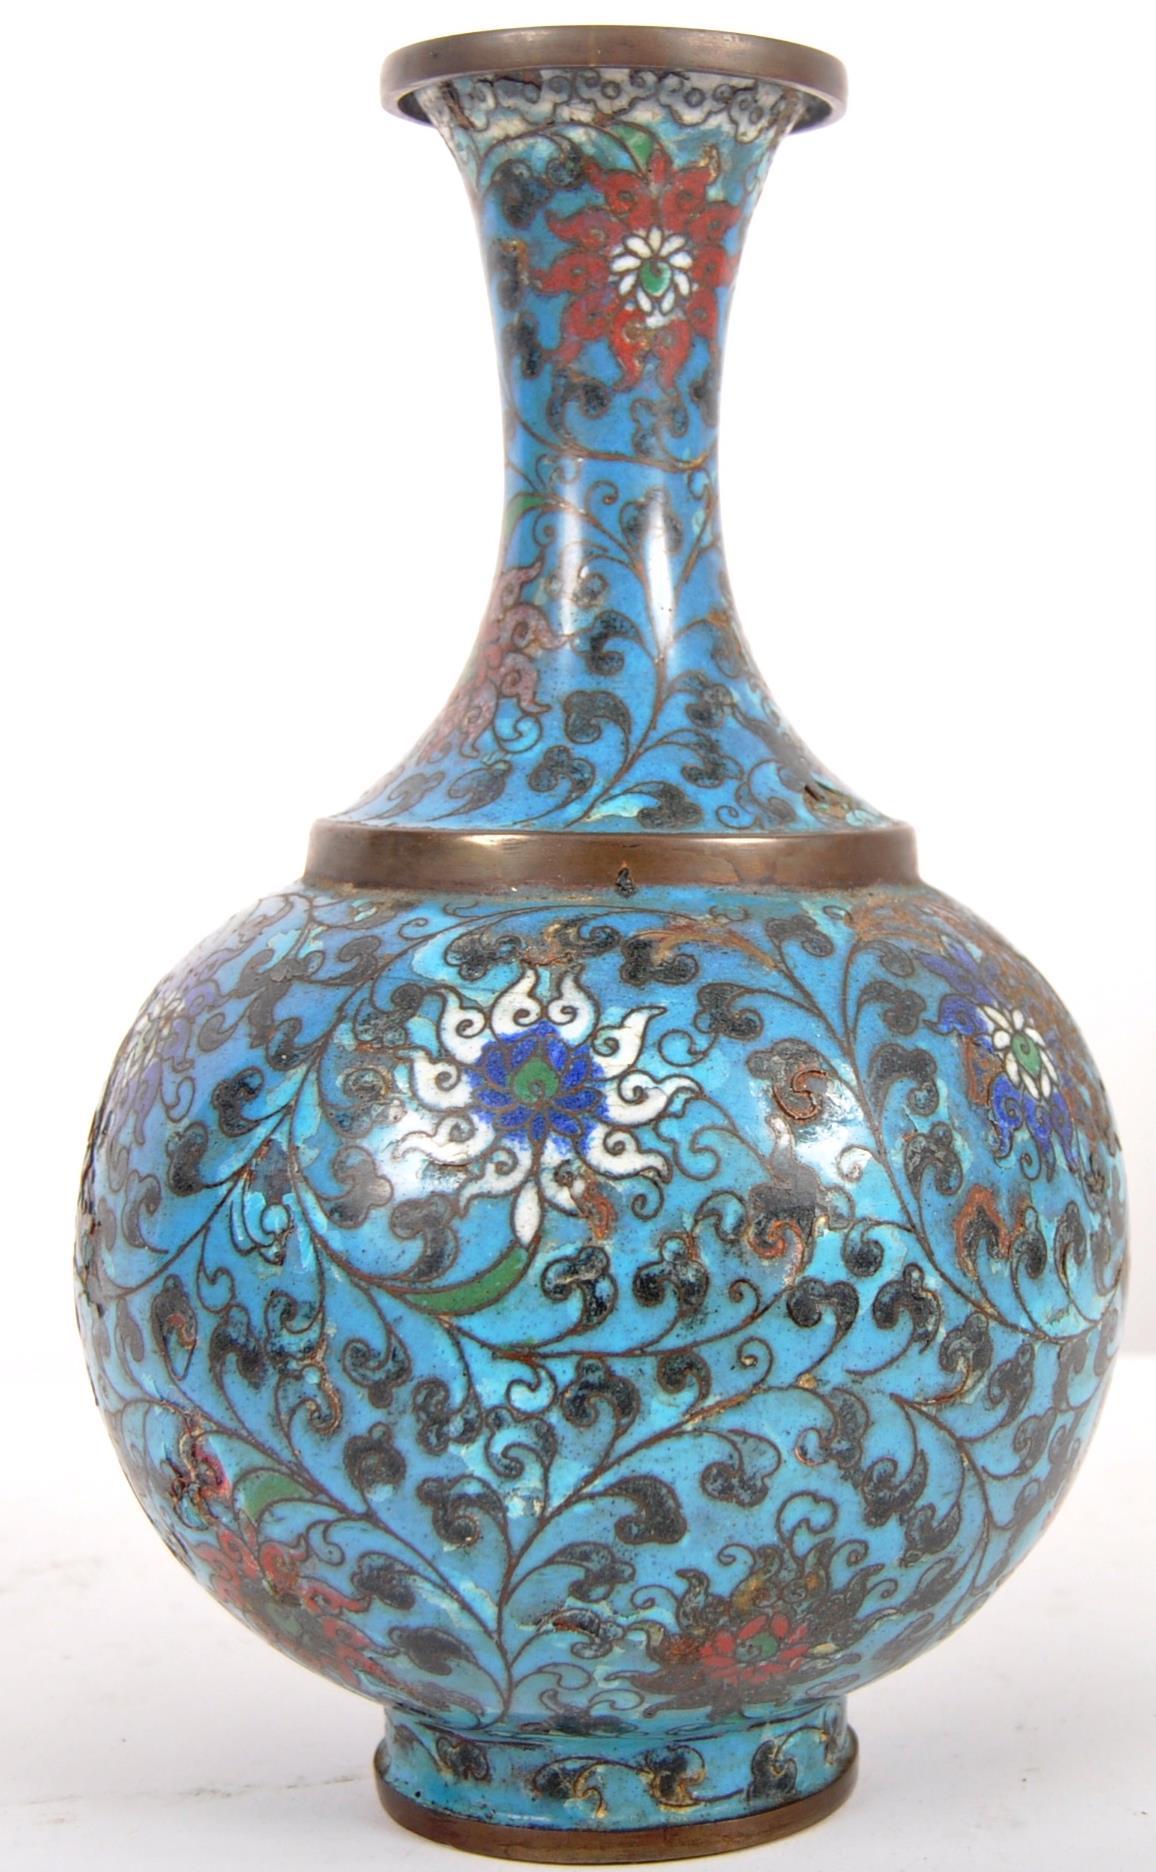 EARLY 20TH CENTURY CHINESE CLOISONNE VASE - Image 4 of 7